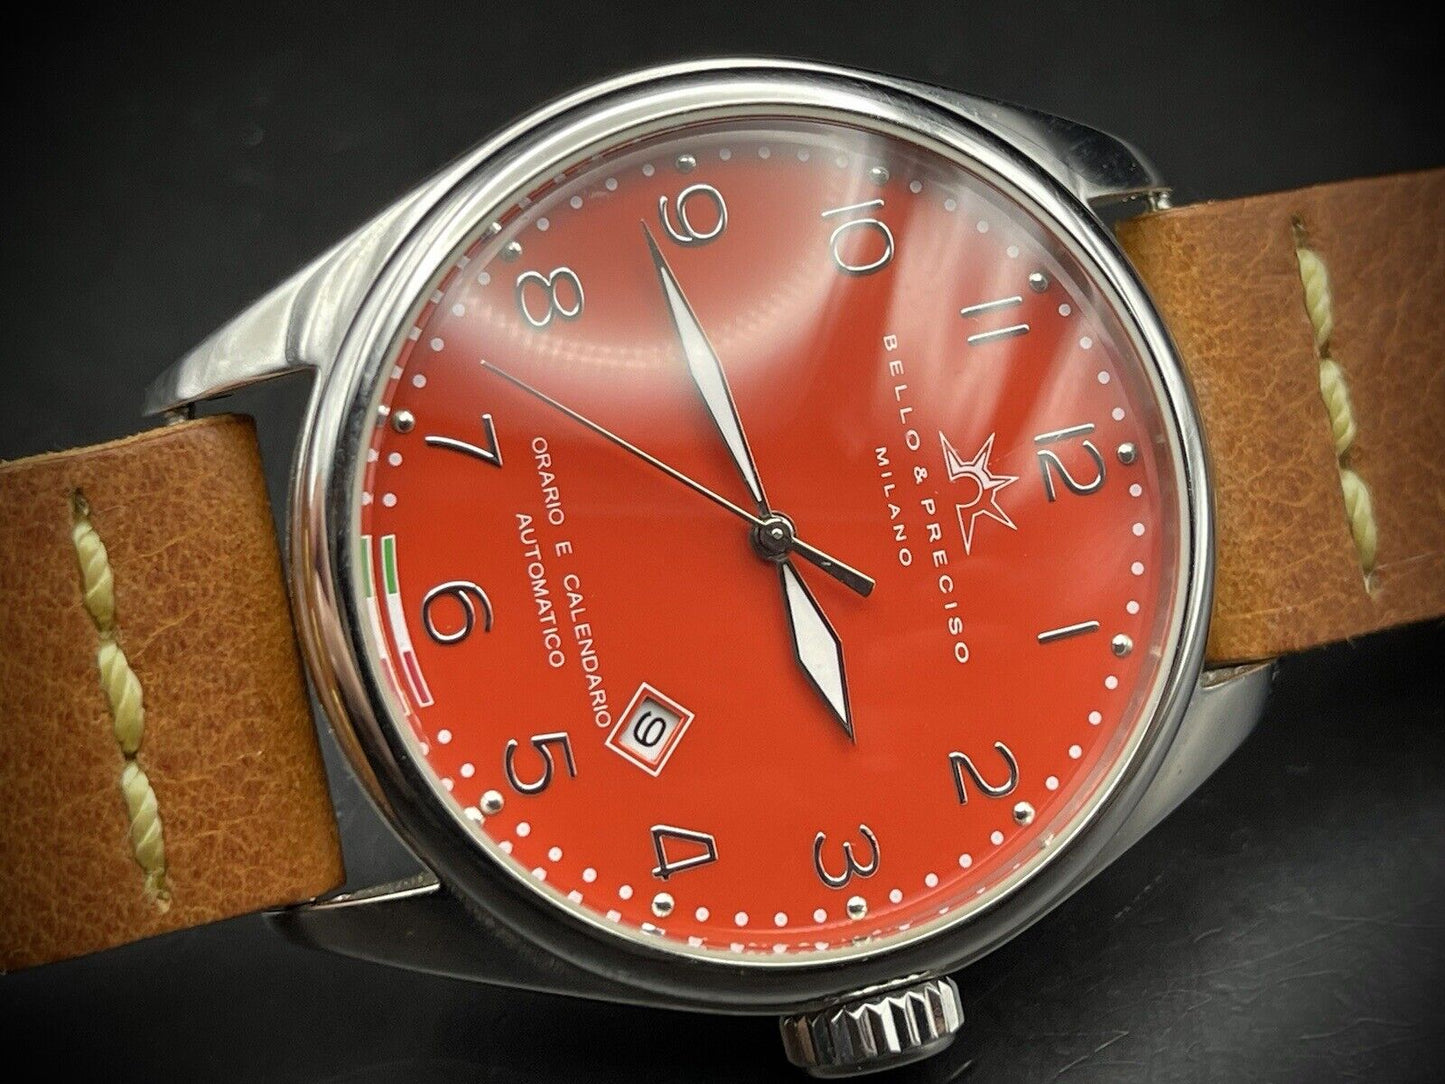 Bello & Preciso Milano Italain Mens Watch NOS Red Dial Automatic 43mm - Grab A Watch Co